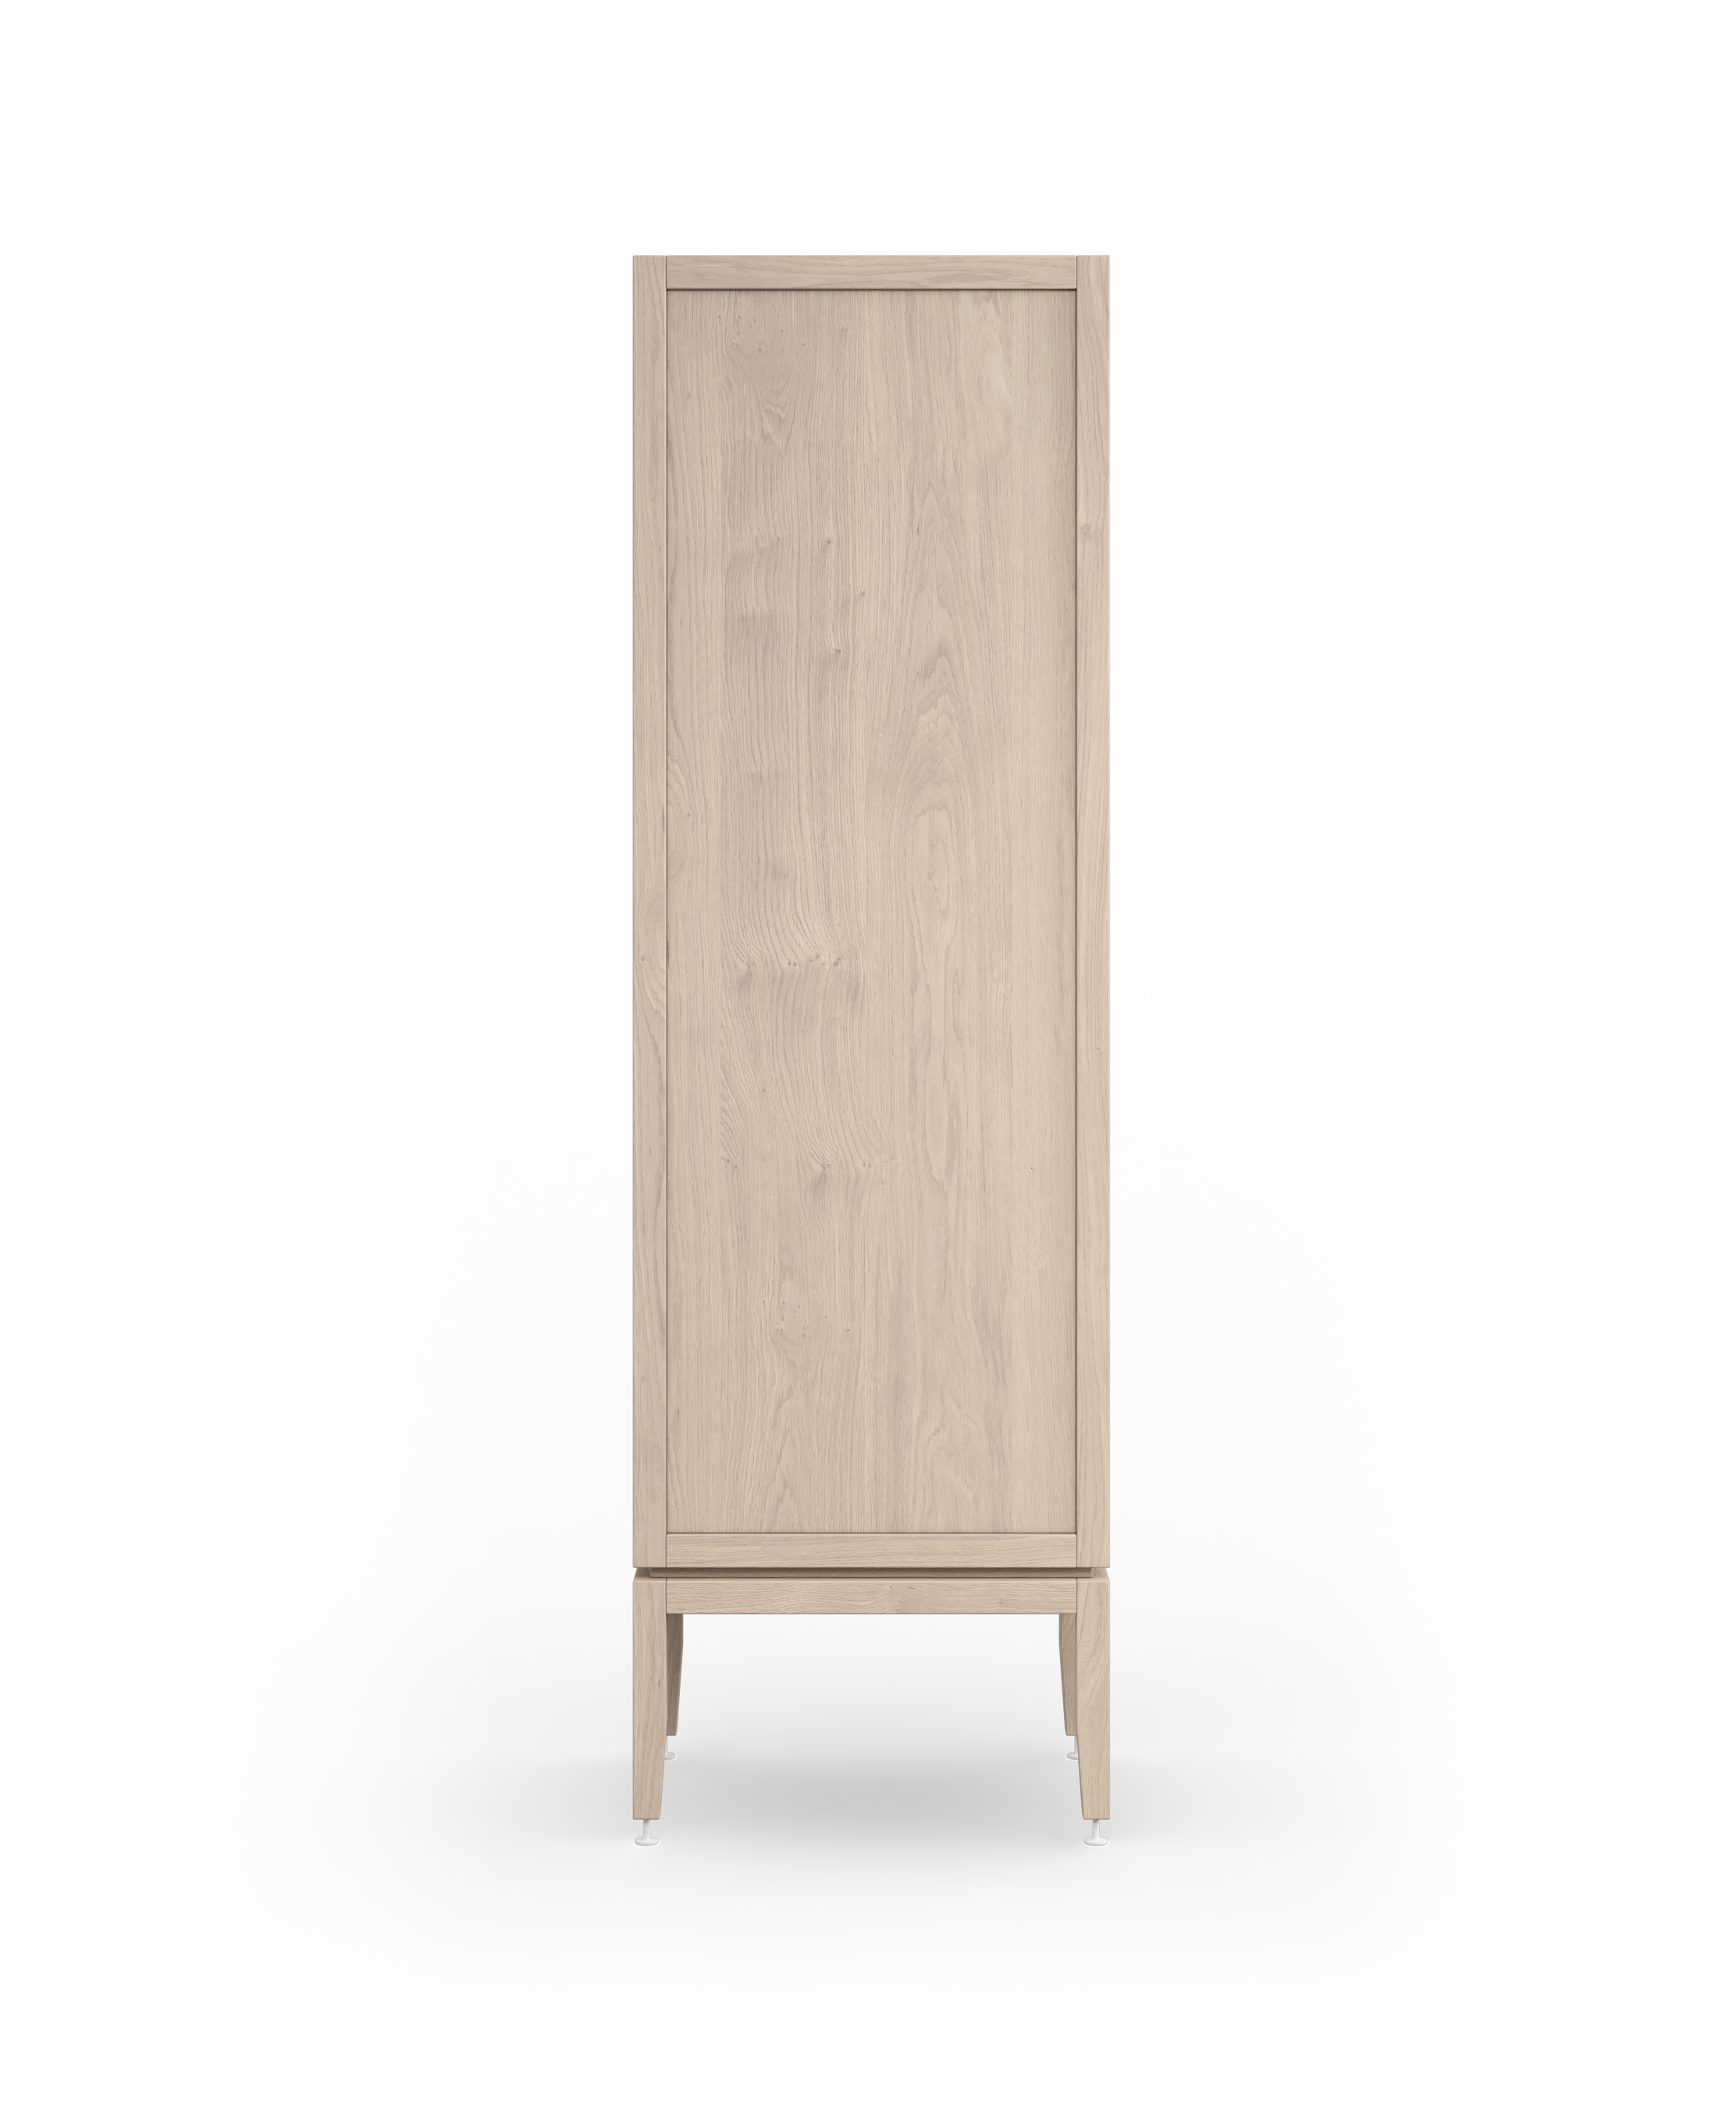 Coquo modular bathroom dresser with one door and two drawers in white stained oak with metal handles.